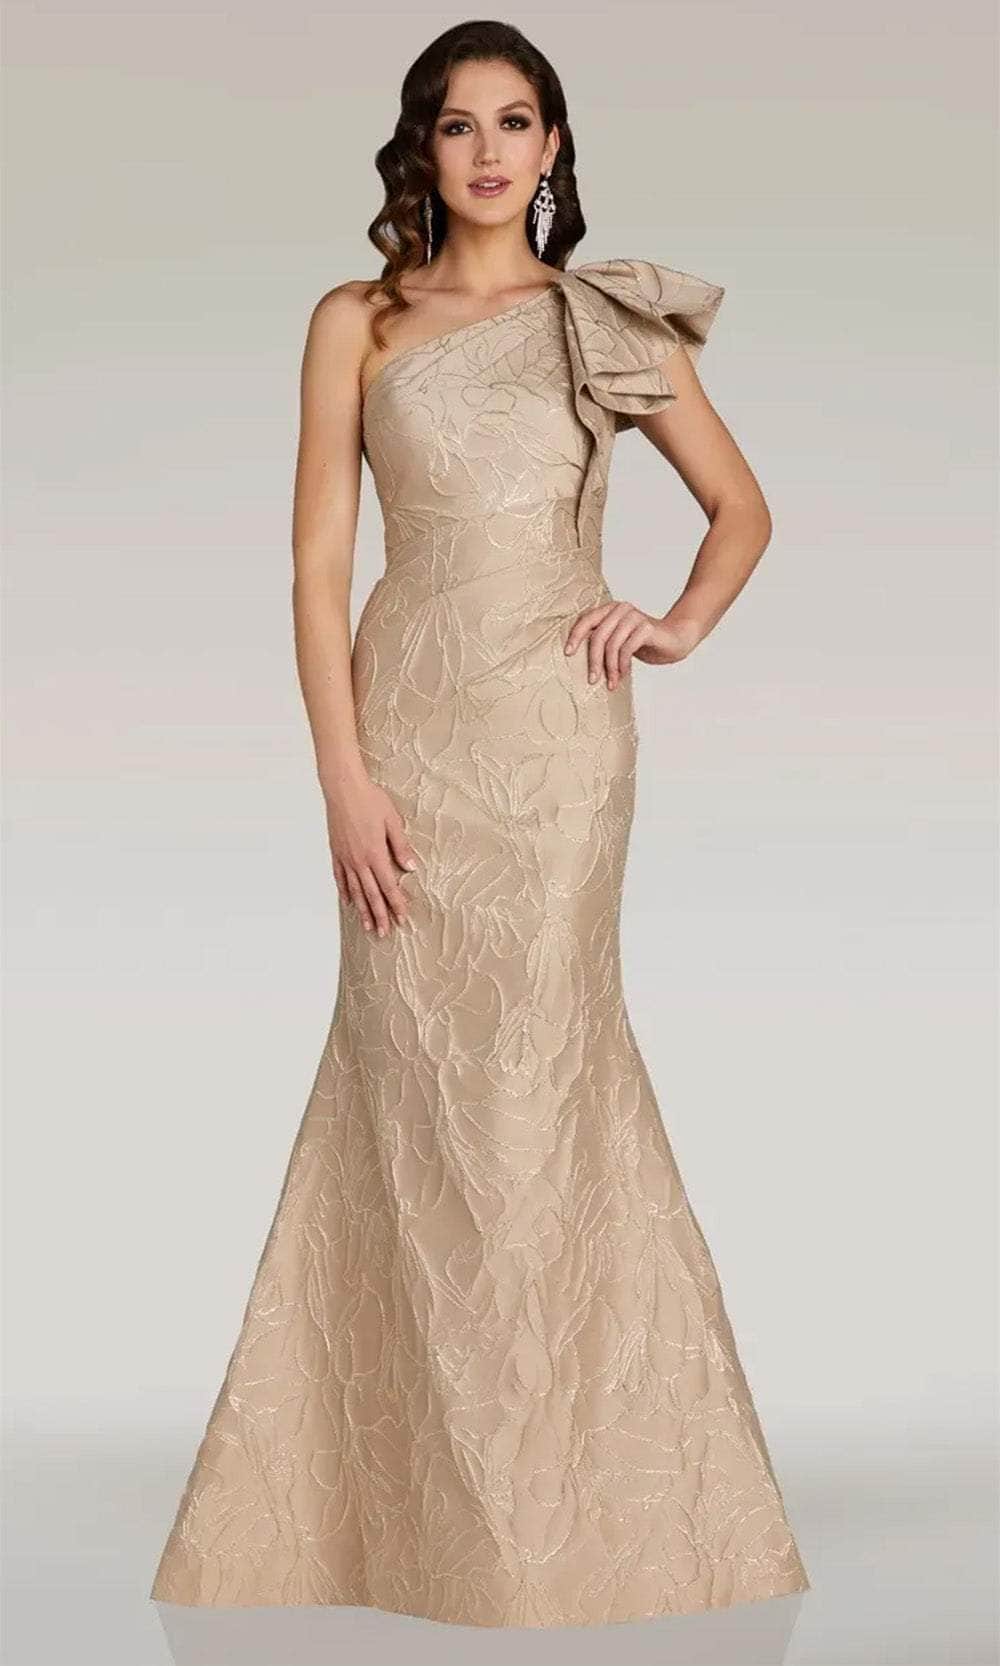 Image of Gia Franco 12375 - Floral Embossed Evening Dress